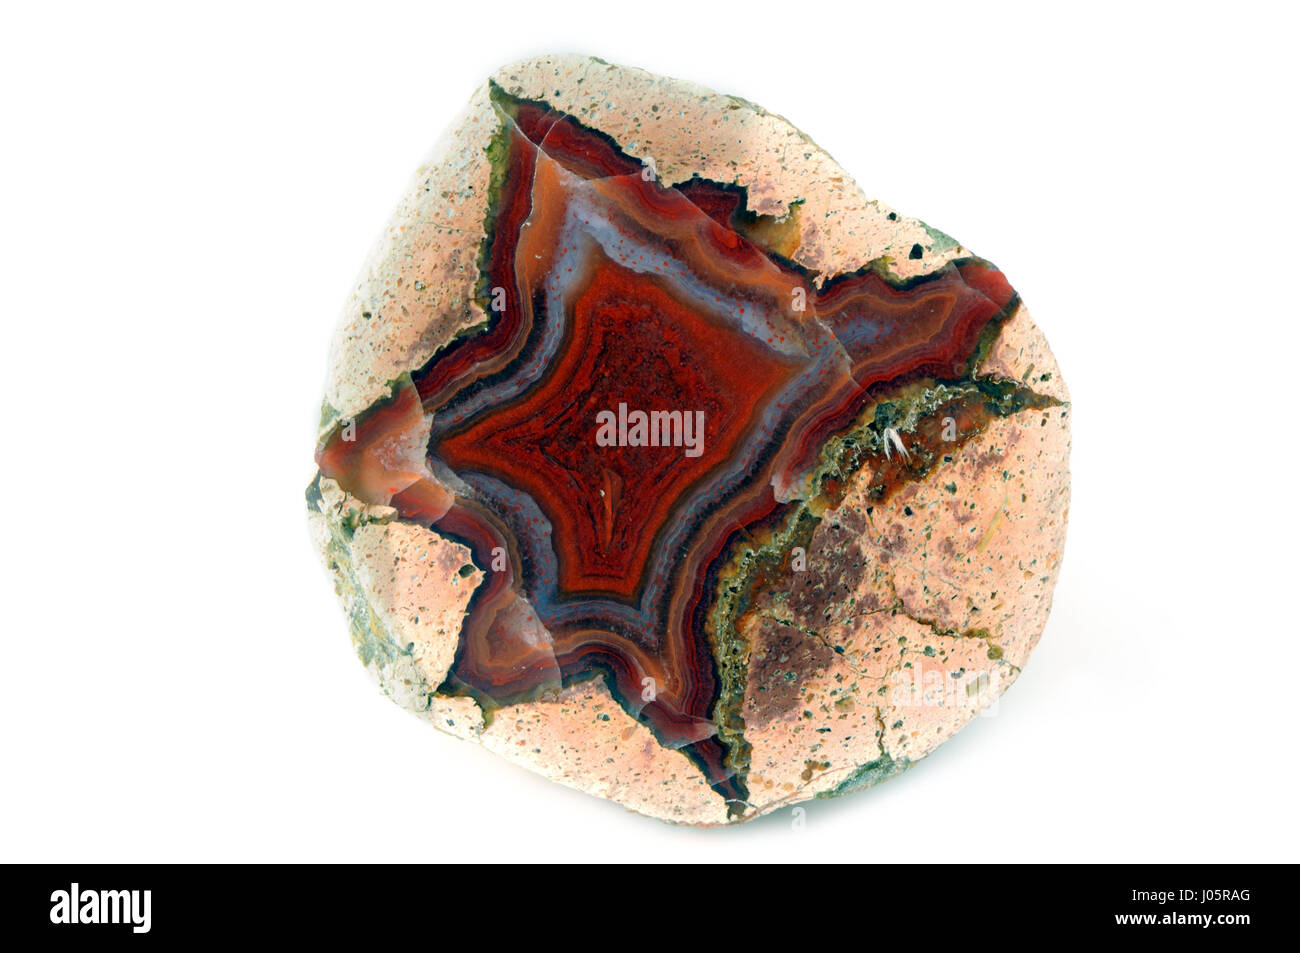 red blue banded agate stone. Stock Photo